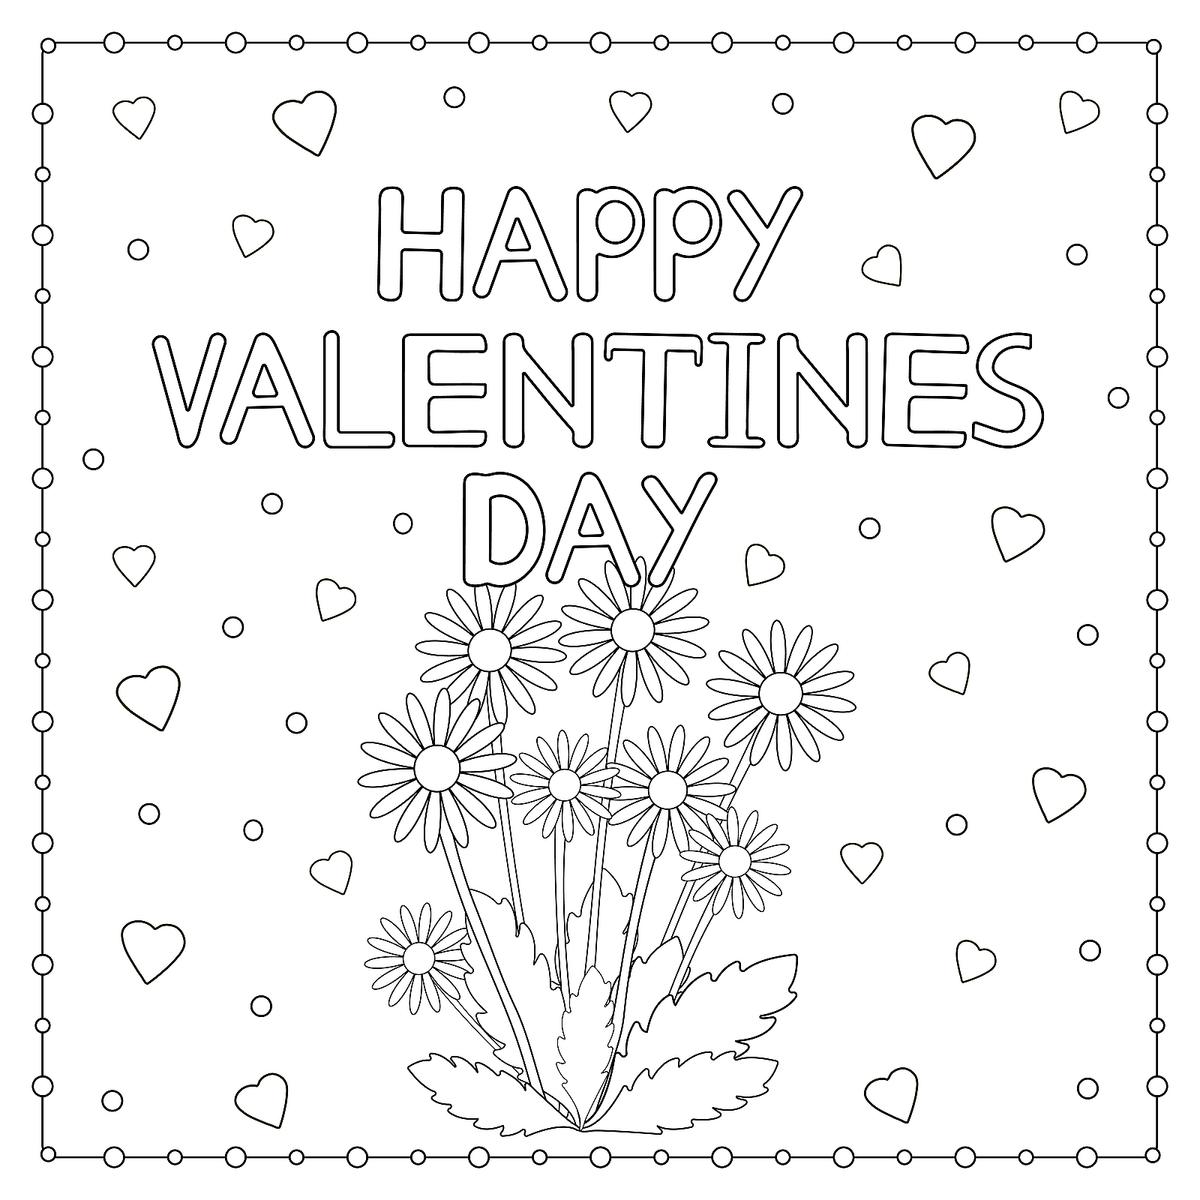 Valentines day coloring pages free fun printable coloring pages for kids will show the love printables mom